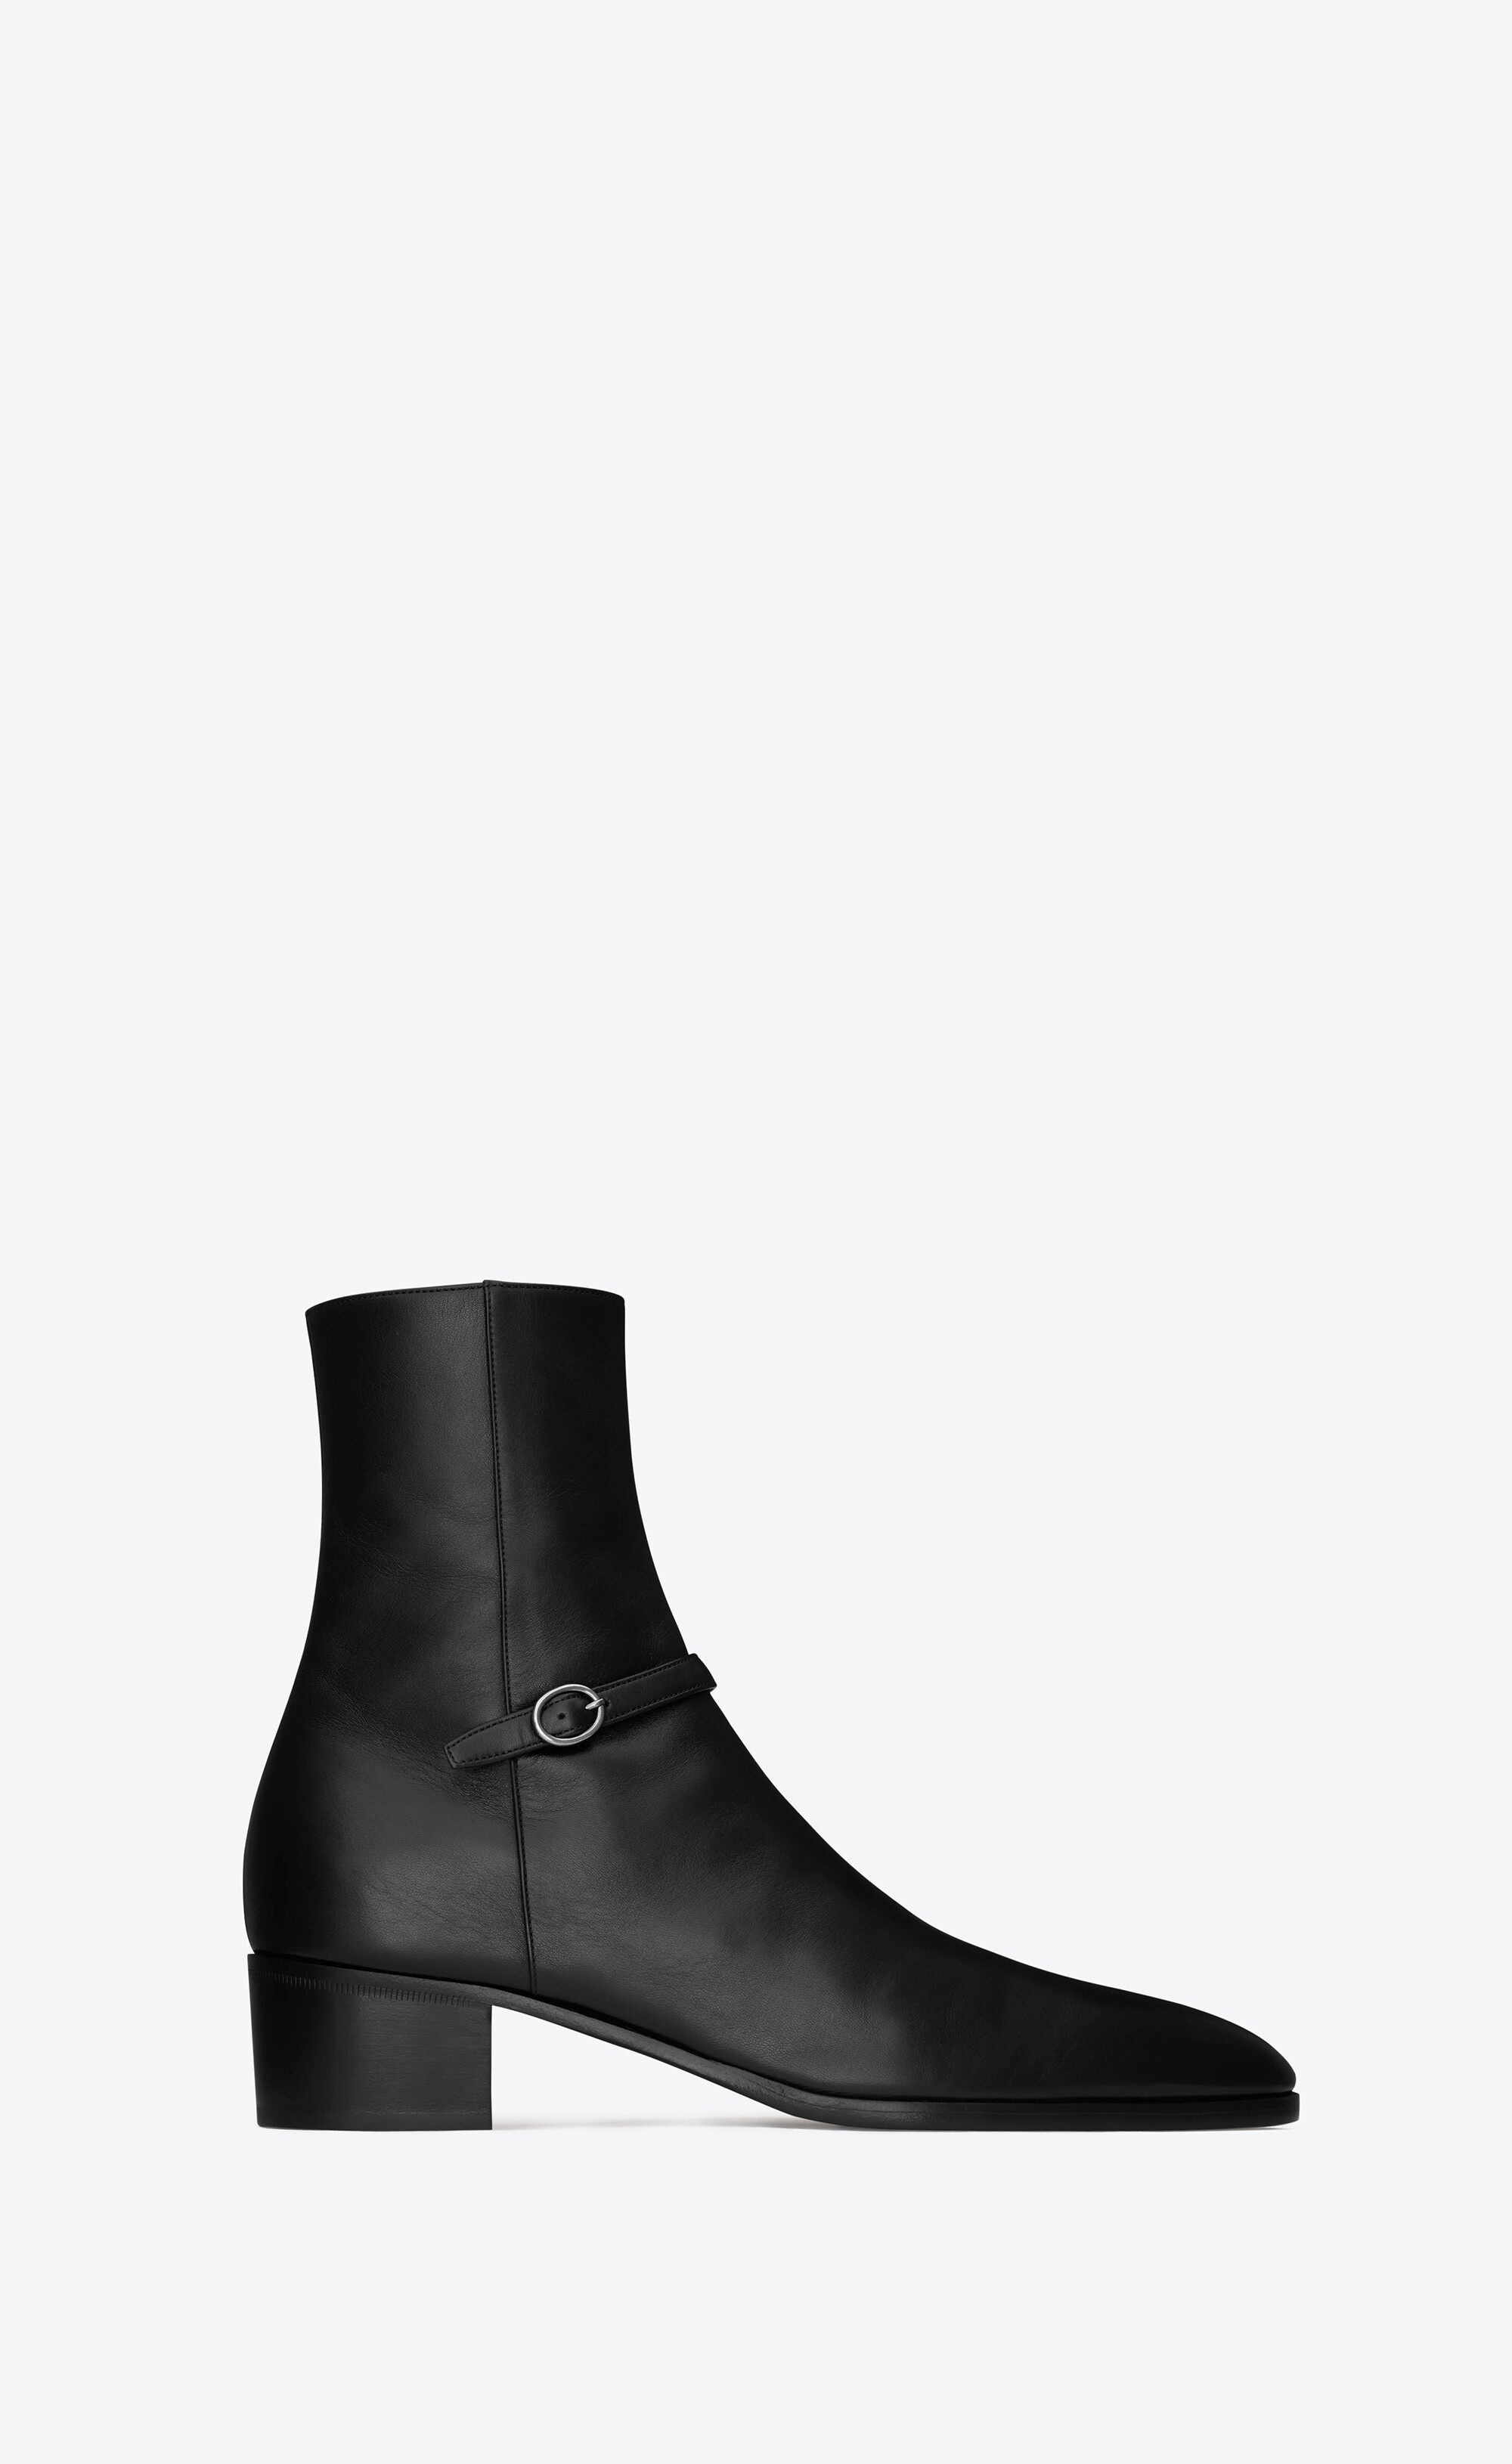 vlad zipped boots in smooth leather - 1